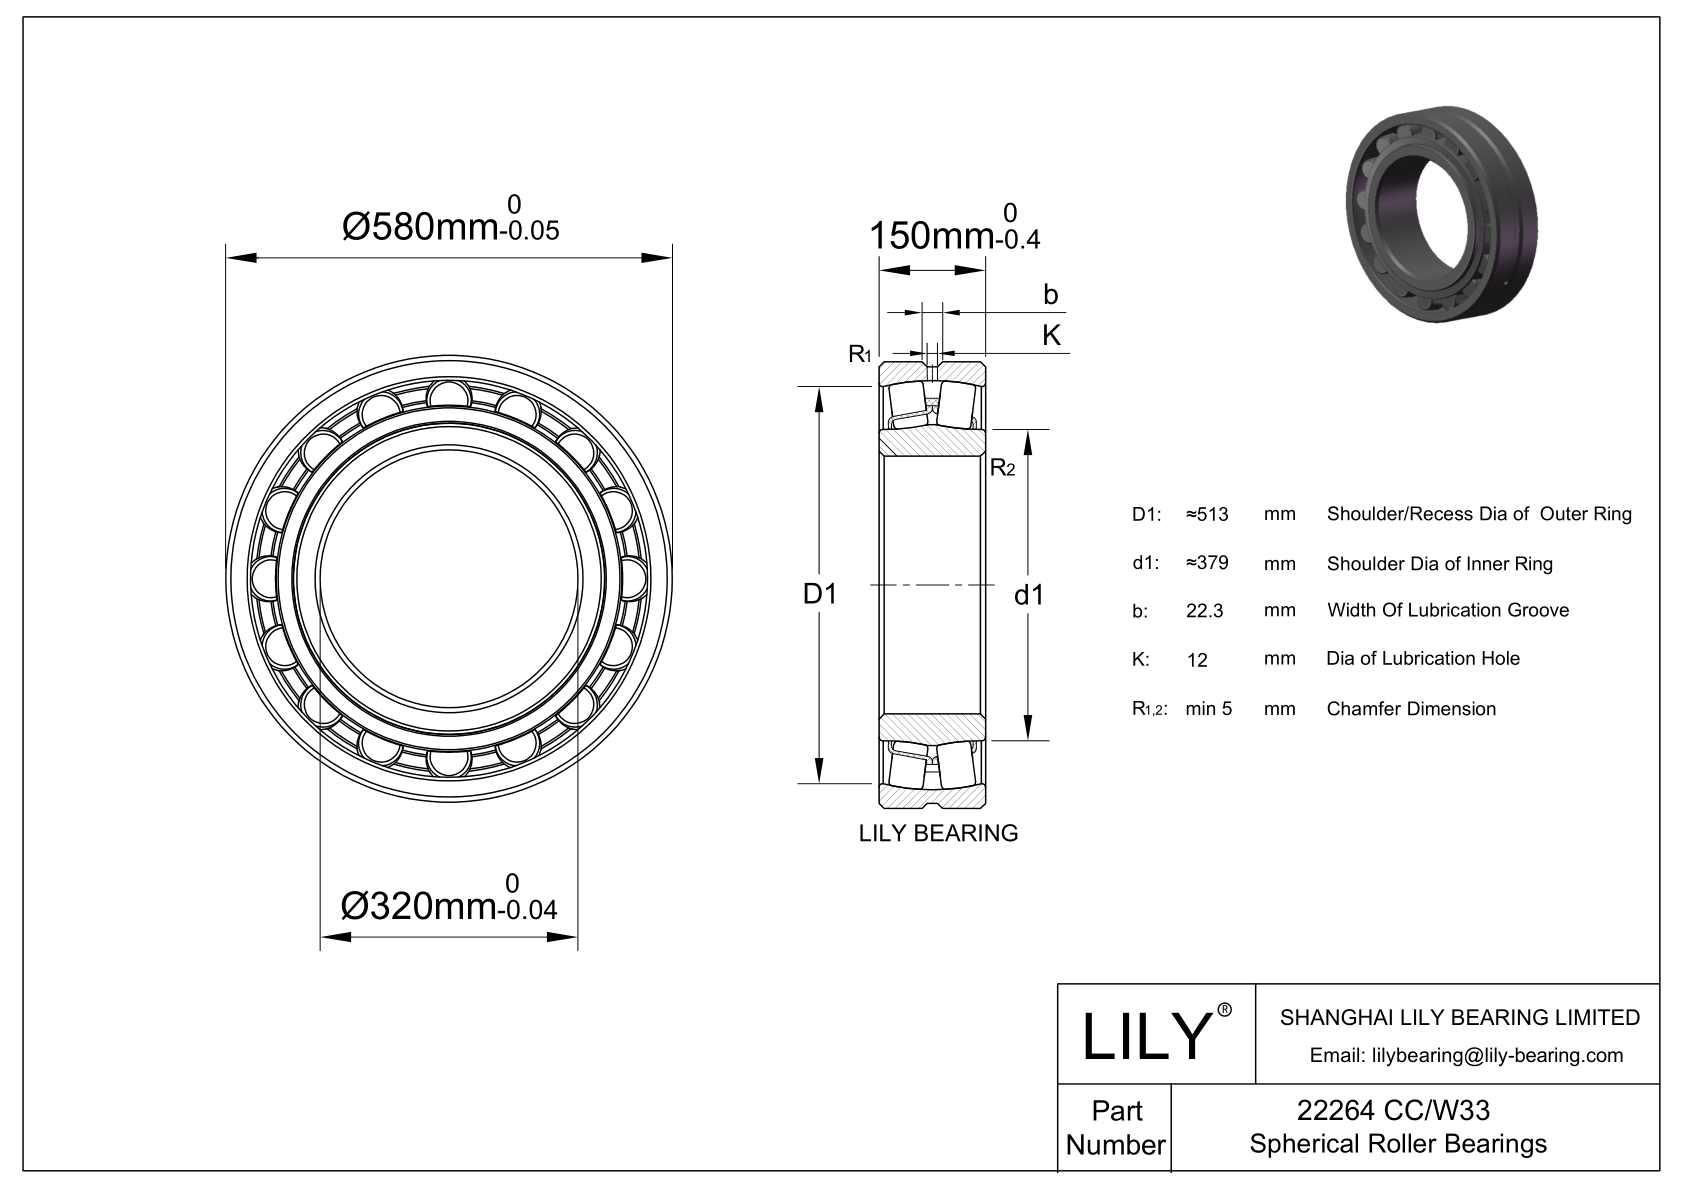 22264 CC/W33 Double Row Spherical Roller Bearing cad drawing